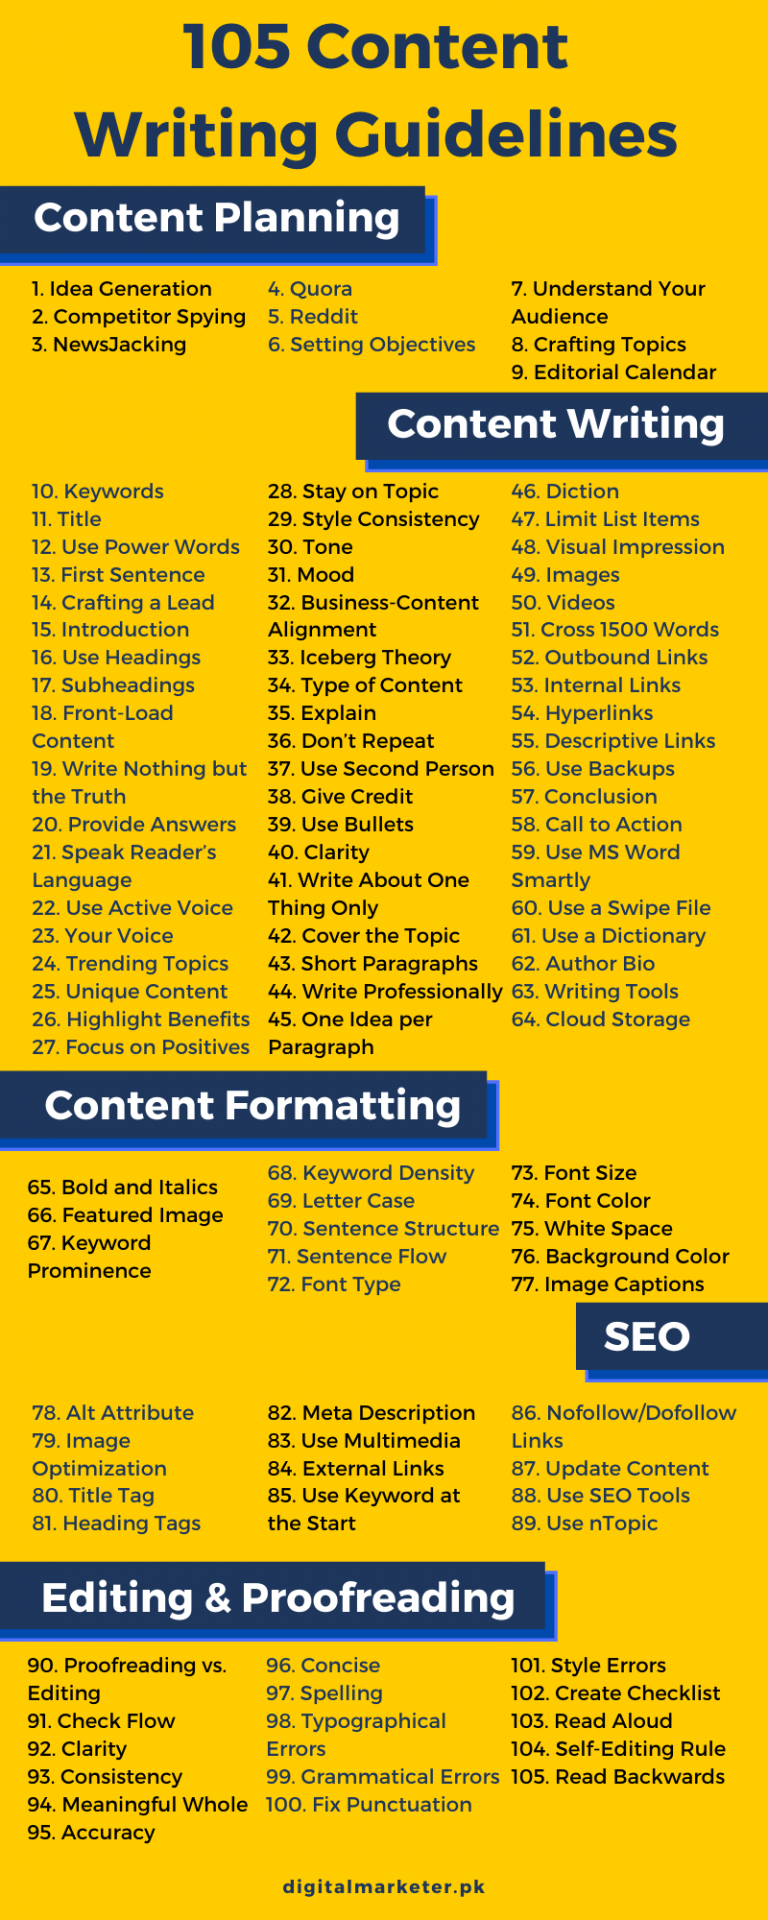 [Infographic] 105 Content Writing Guidelines & Tips